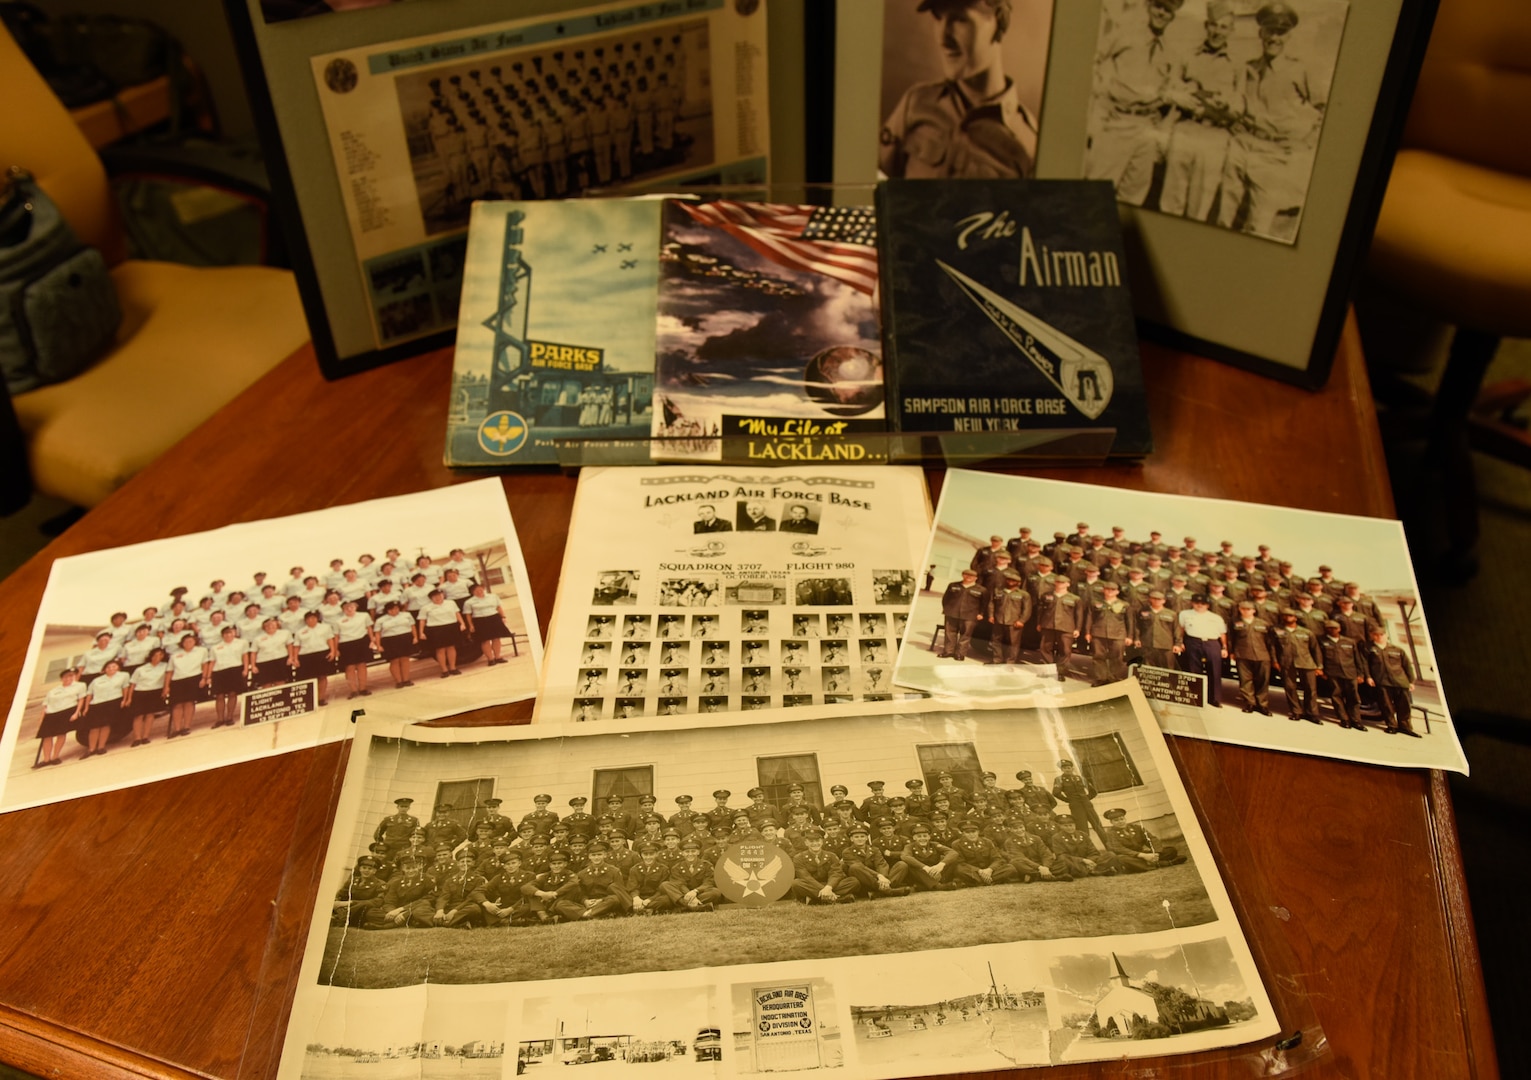 BMT flight photos and yearbooks